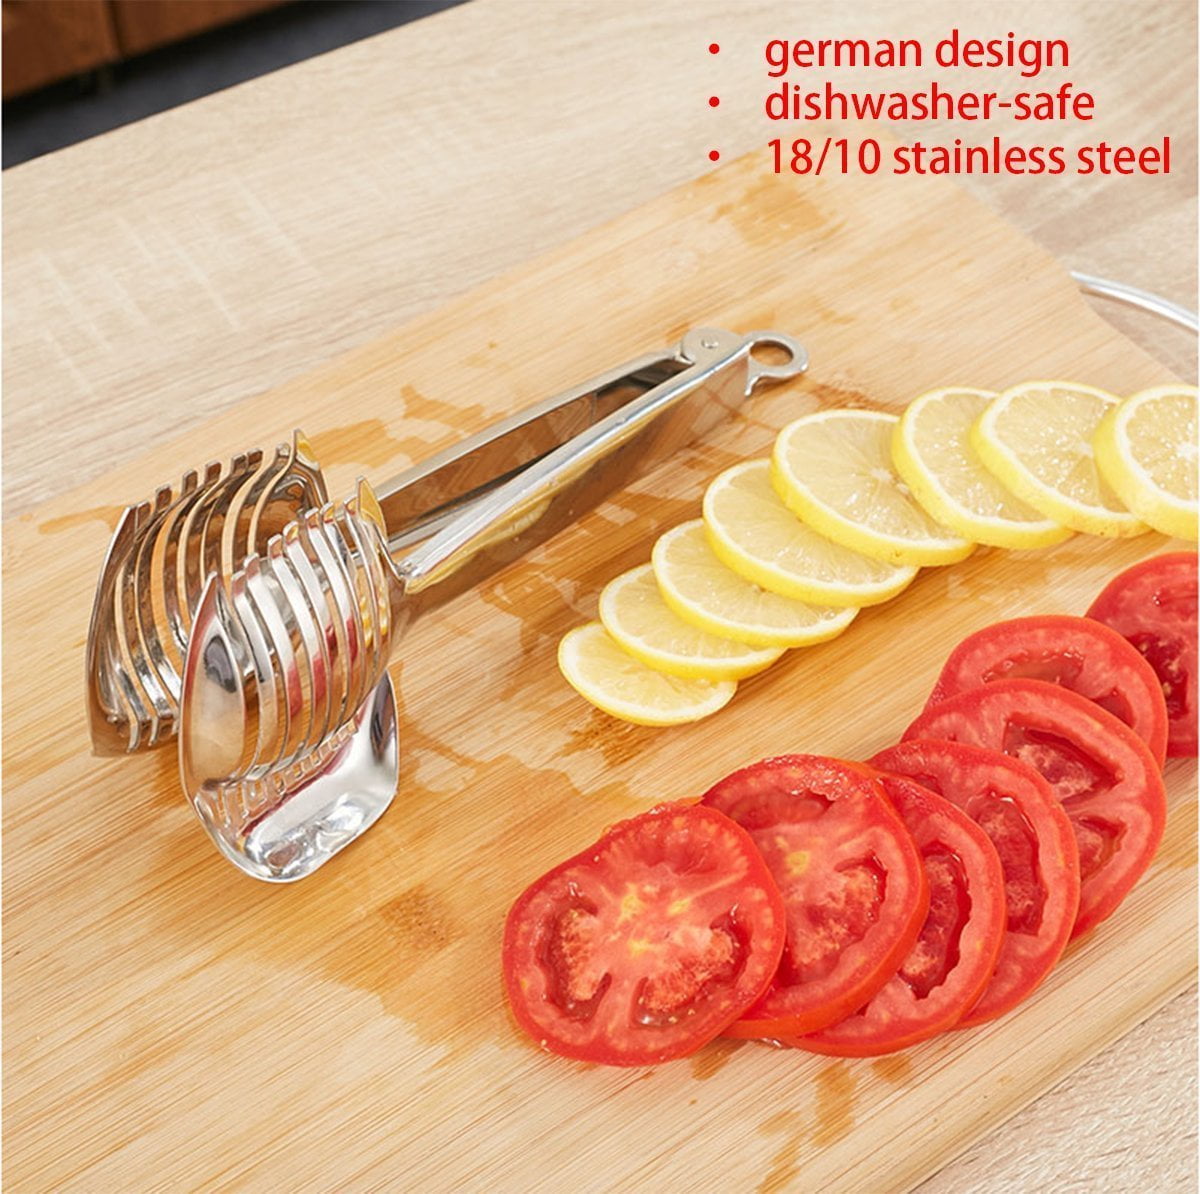 Hvanam Onion Cut Tomato Slicer Lemon Handy Kitchen Slicing Tool with 10 Even Prongs for Onion Lemon Potato Tomato Slices and Can Be used to Assist